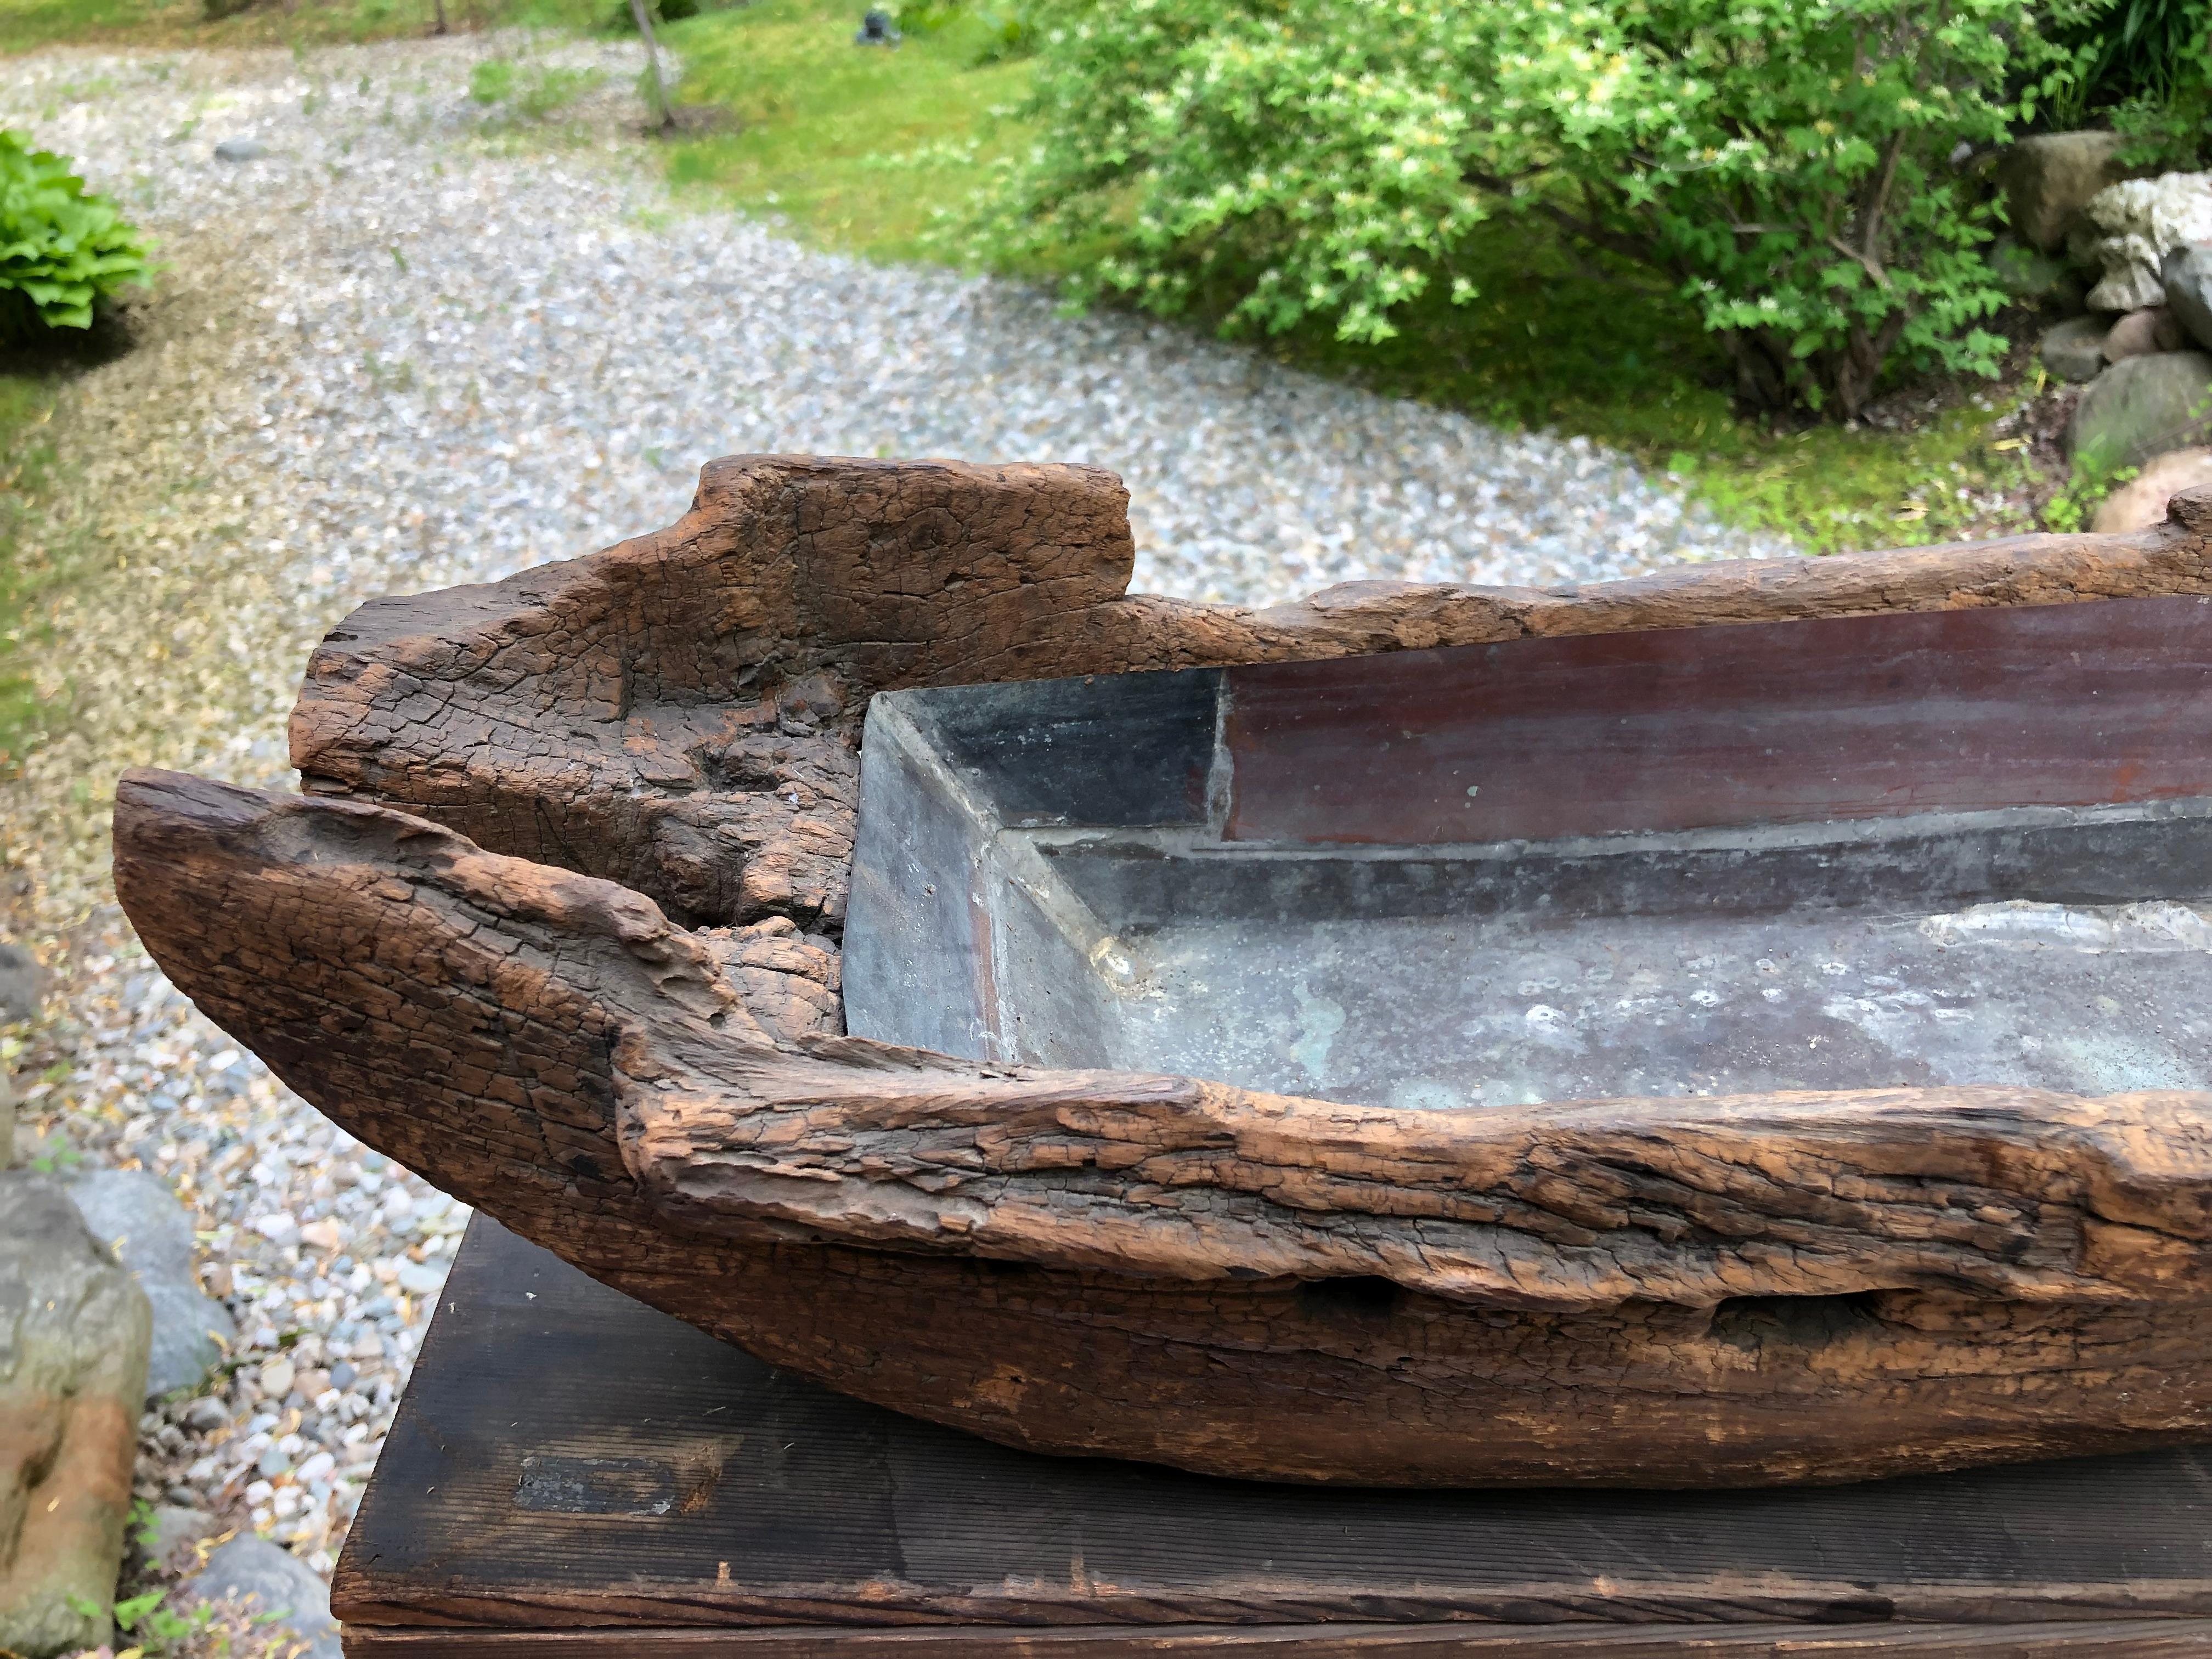 Japanese Big Antique Hand Carved Ikenobu Boat 19th Century, Boxed Hard to Find 6